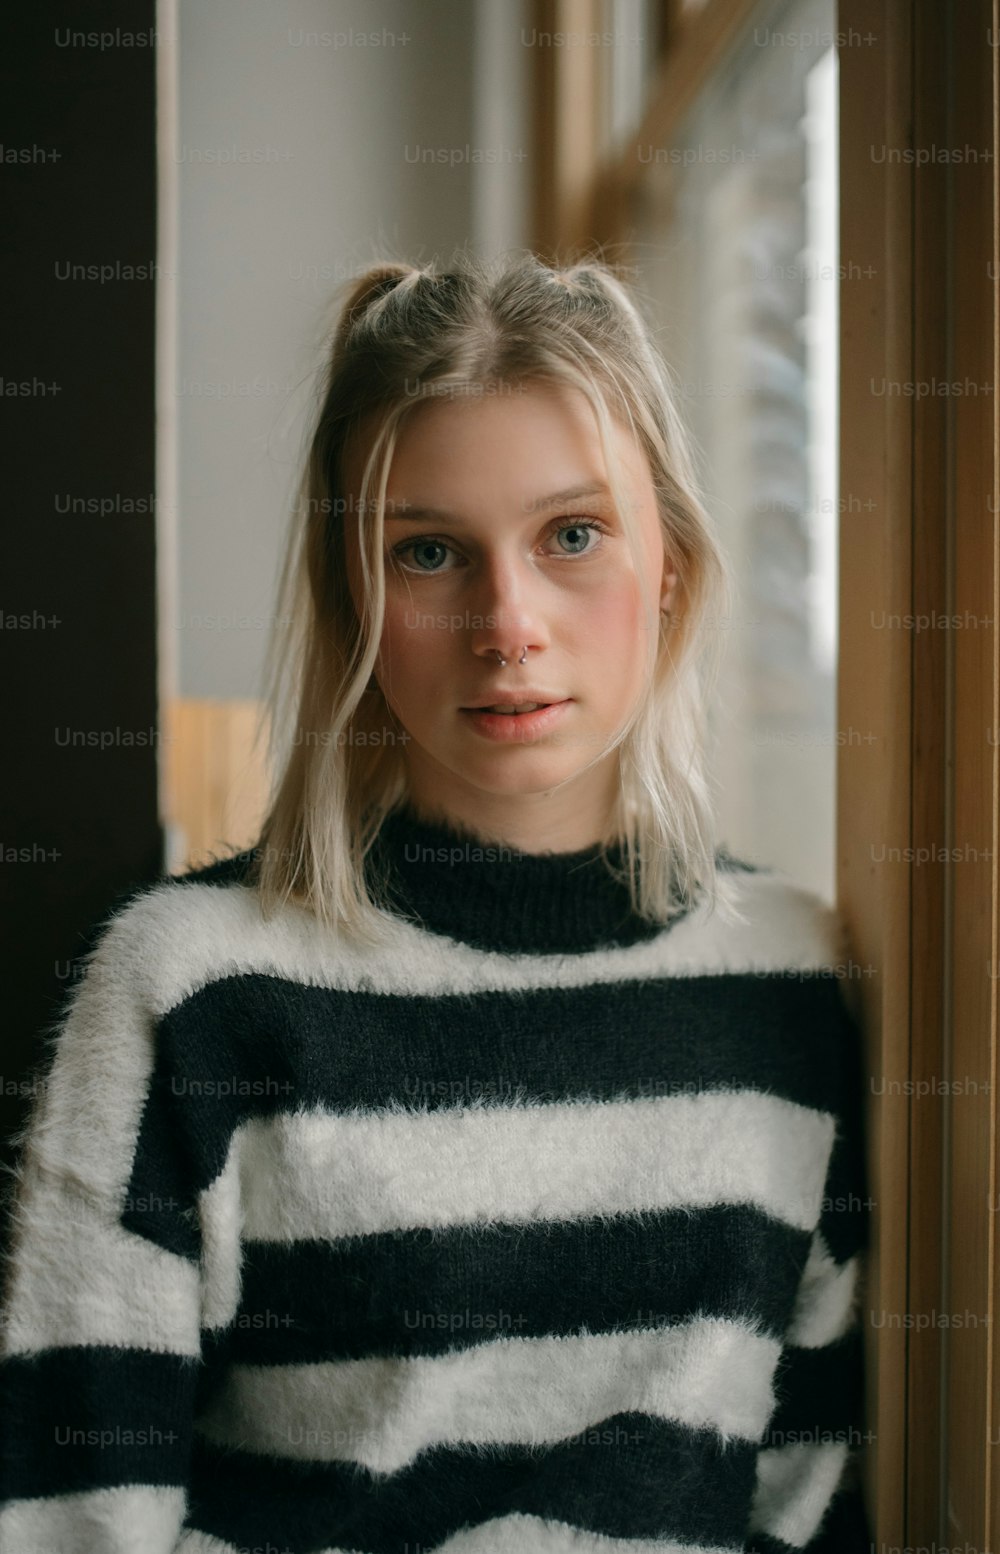 a woman with blonde hair wearing a black and white striped sweater